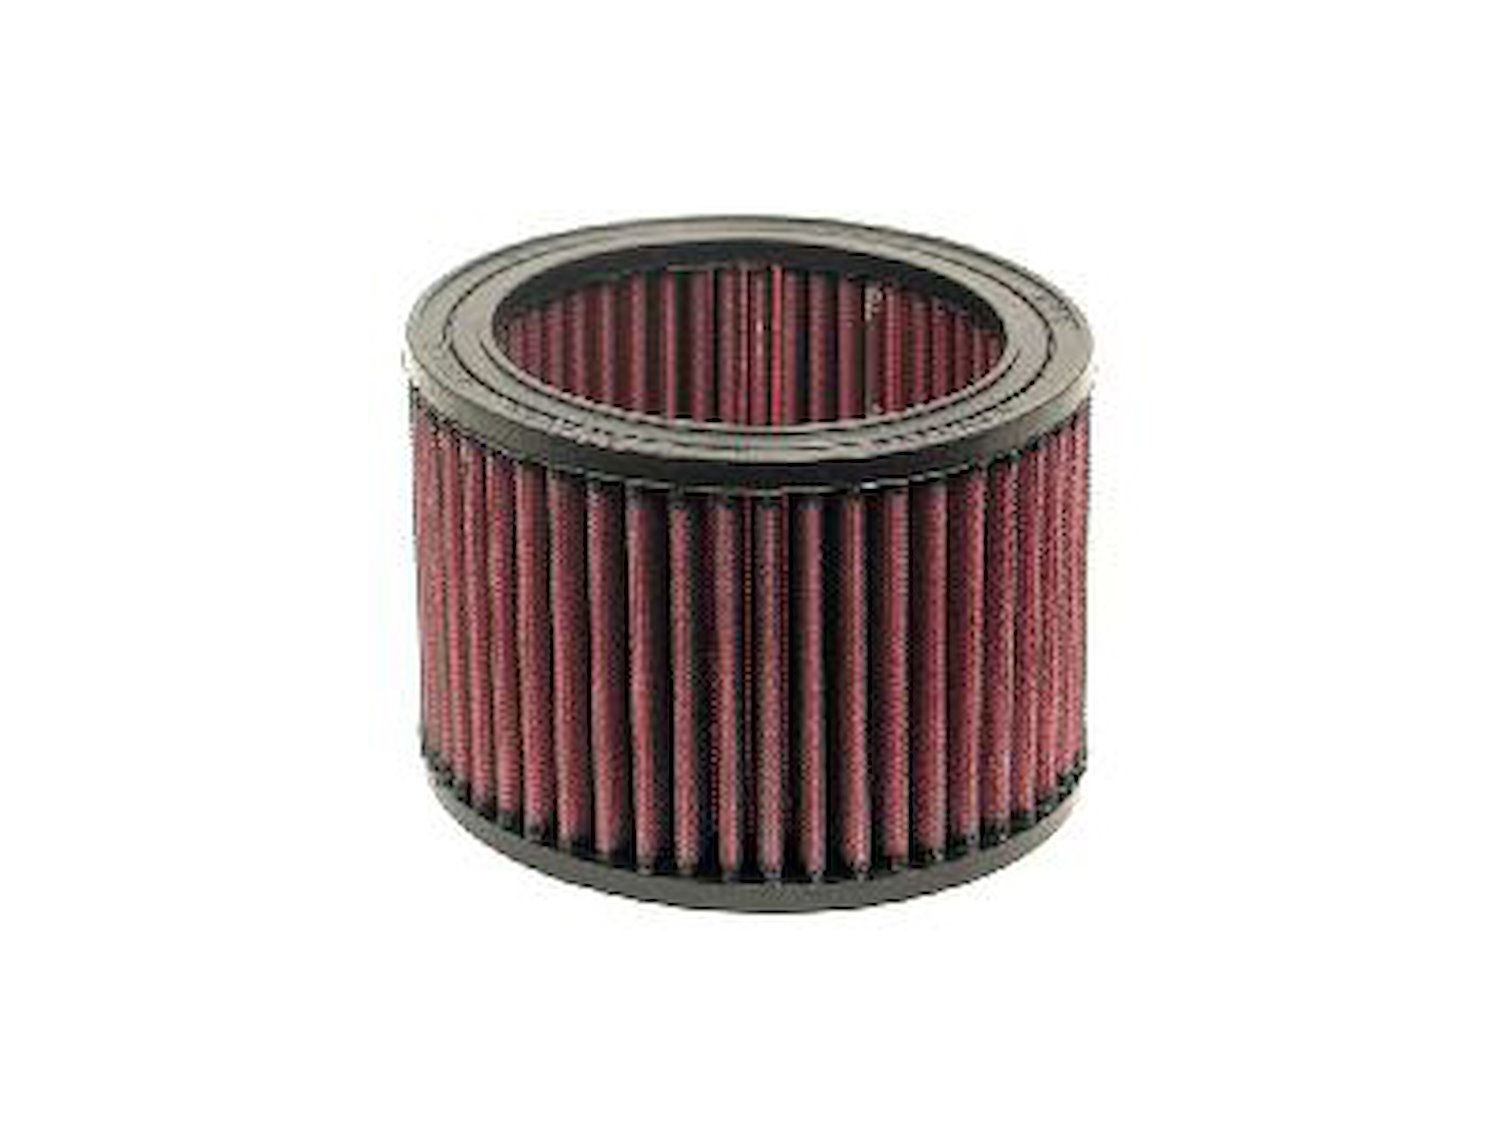 Custom Air Filter Elements Filter Style: Down Draft Round